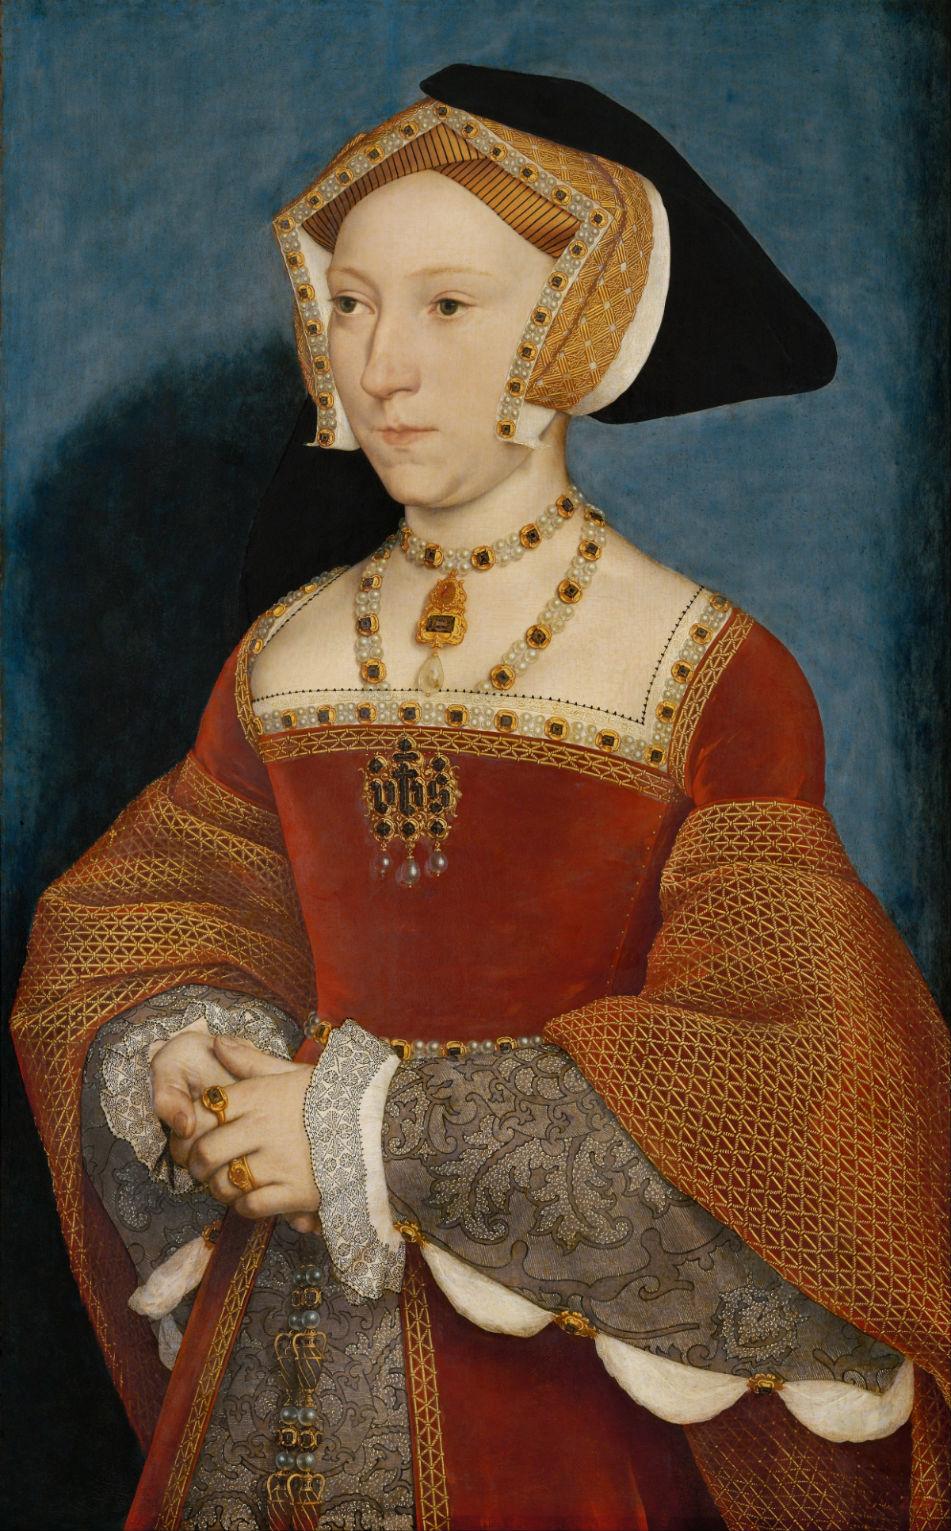 Hans Holbein the Younger - Jane Seymour, Queen of England | Oil on Wood, 1536 | Kunsthistorisches Museum, Vienna, Austria